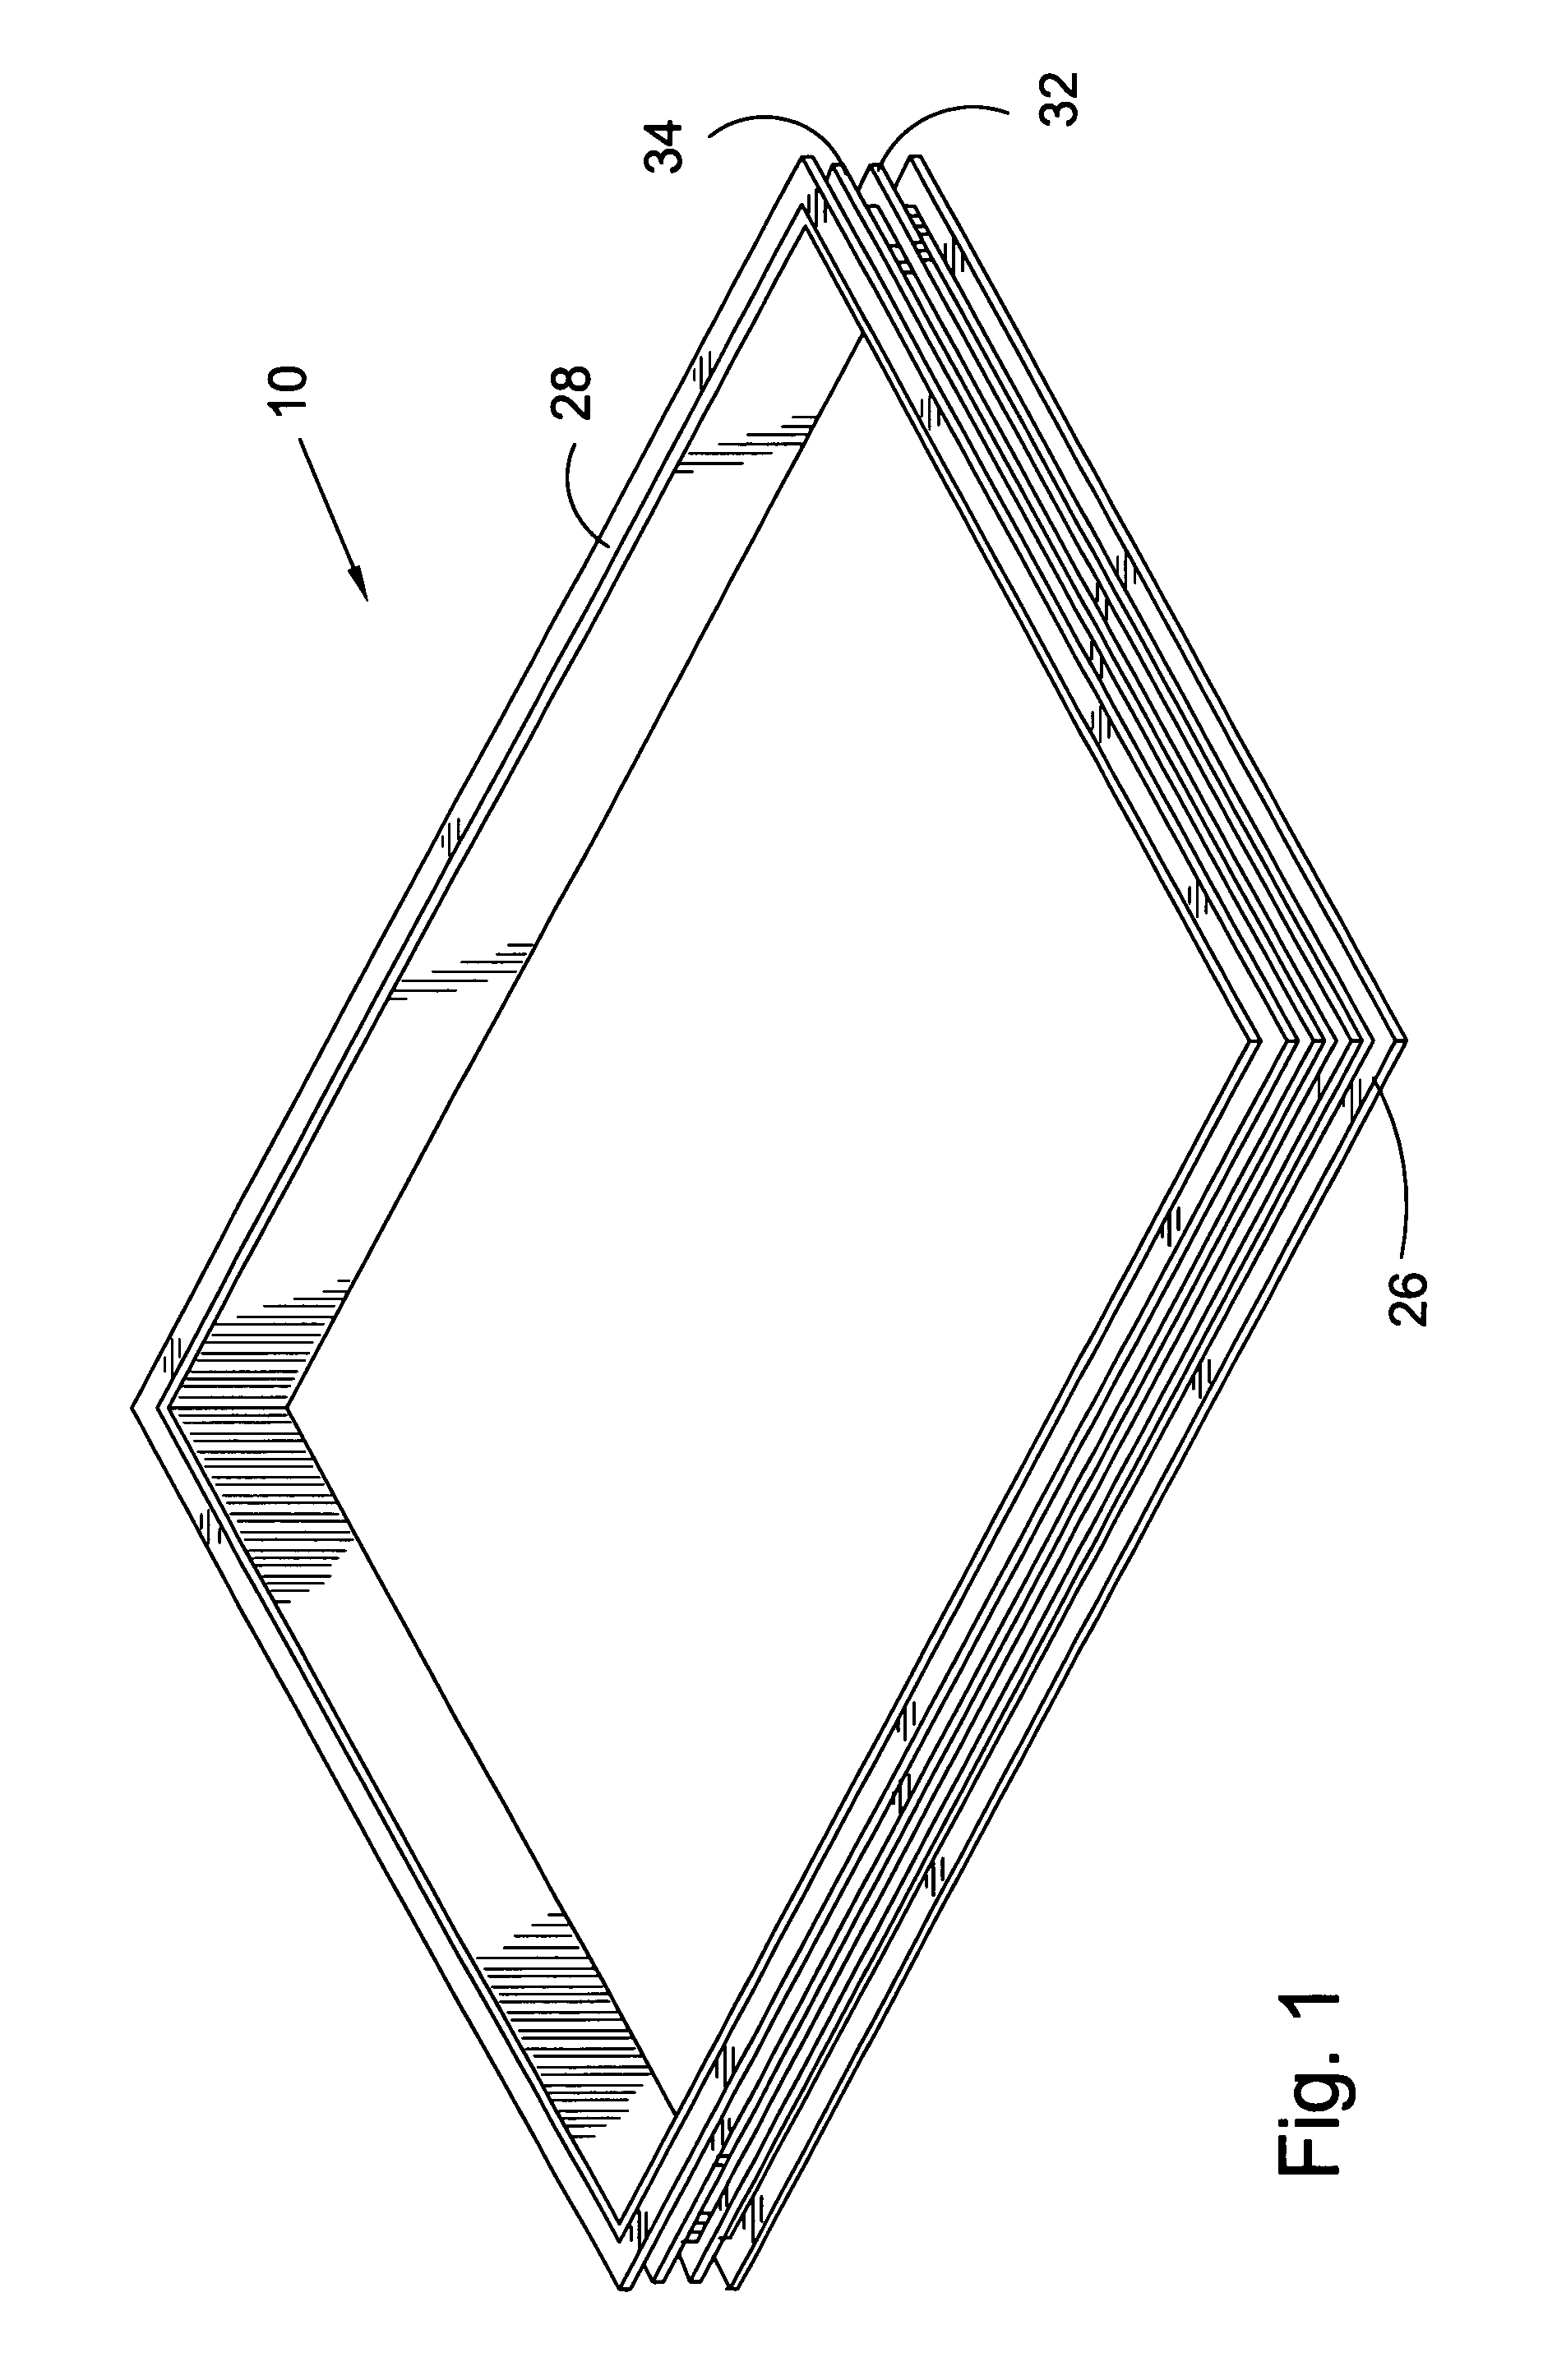 Apparatus and method of fabricating a door